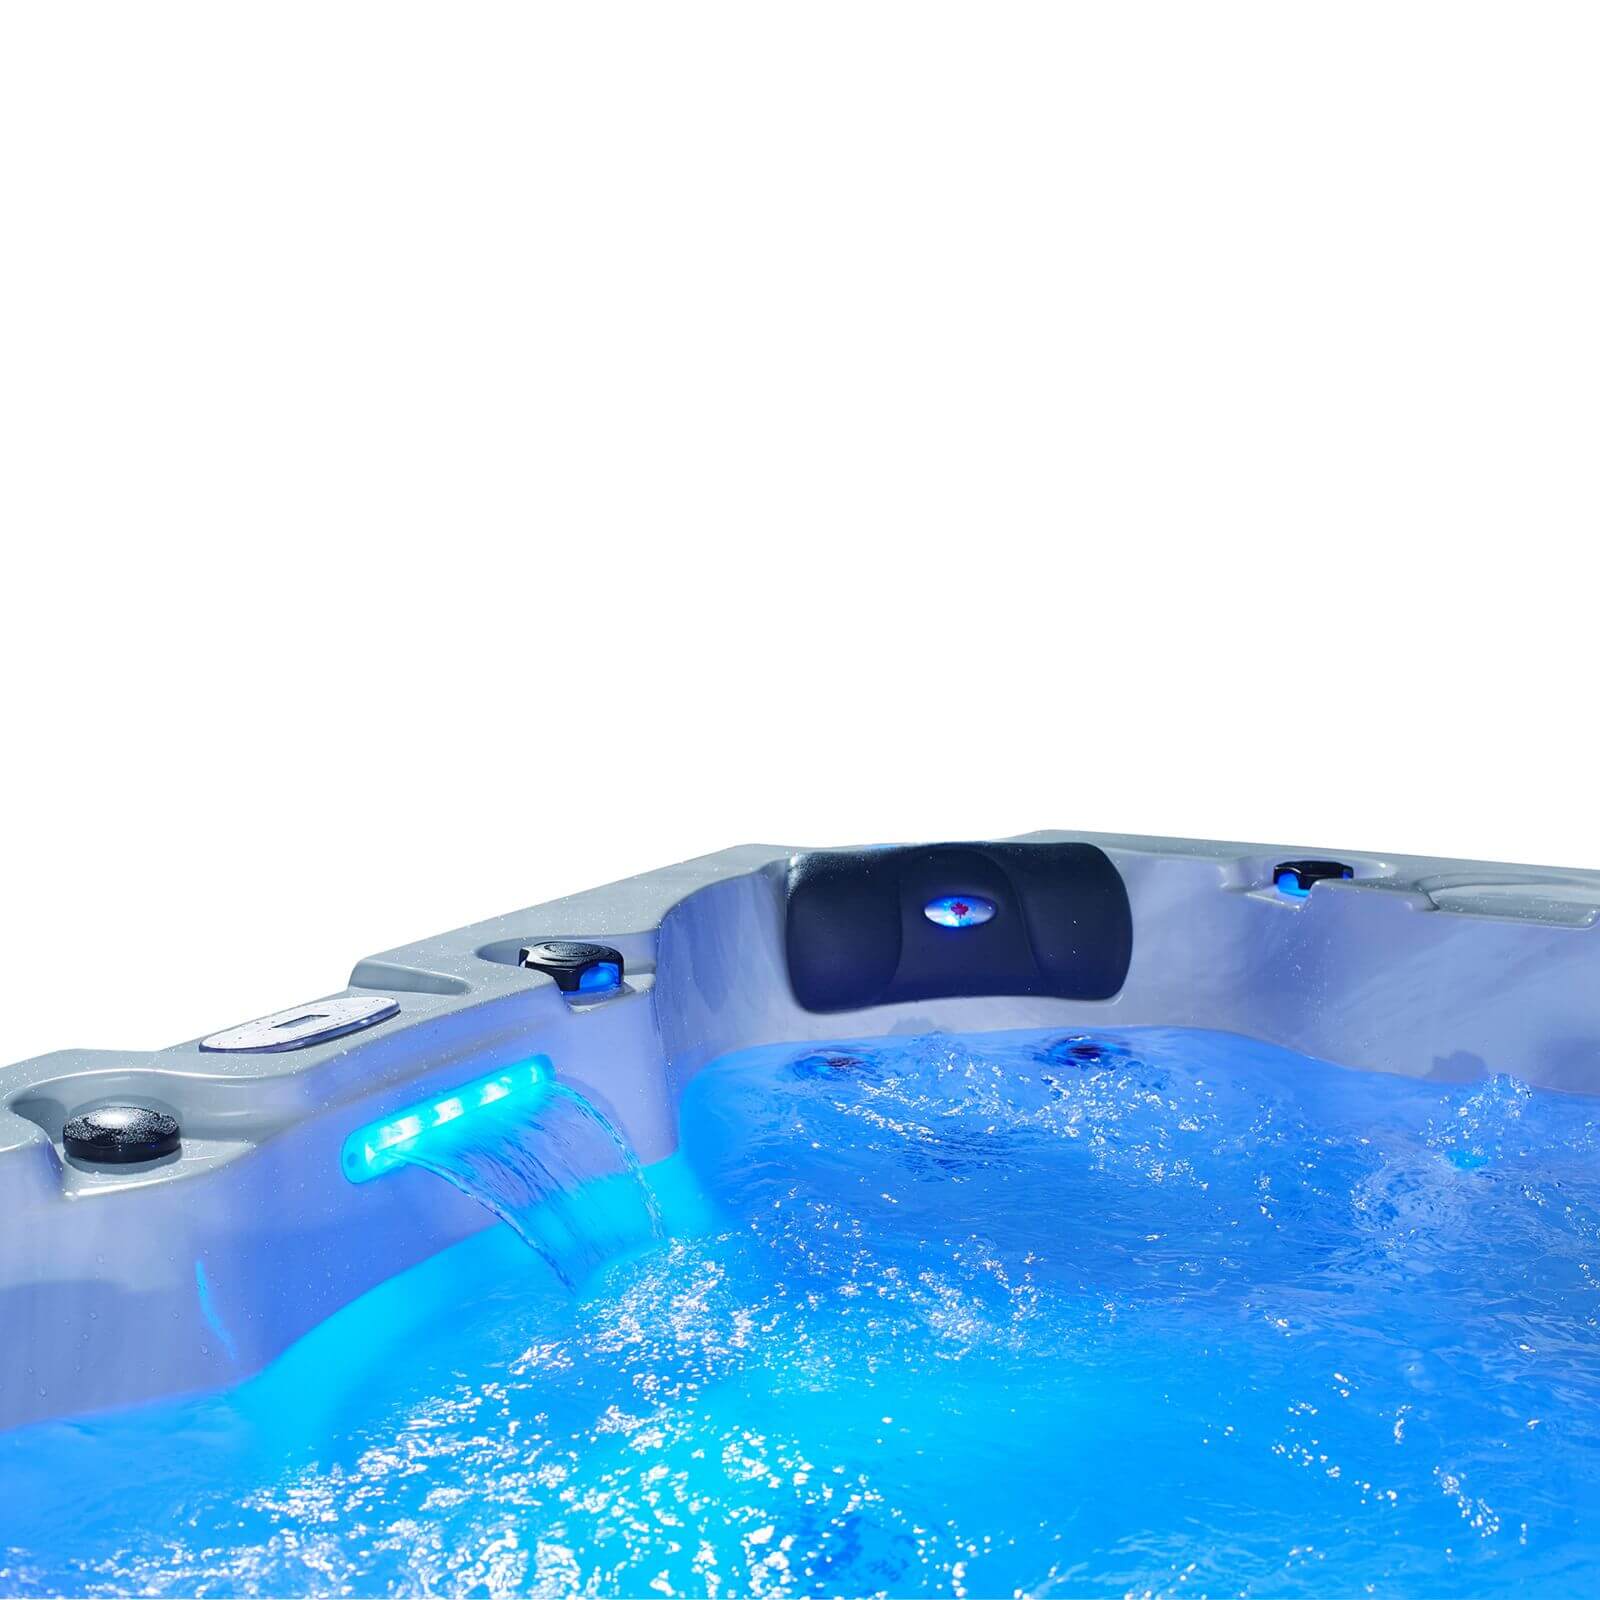 Canadian Spa Halifax Plug & Play 4 Person Hot Tub (Includes Free Delivery & Installation)